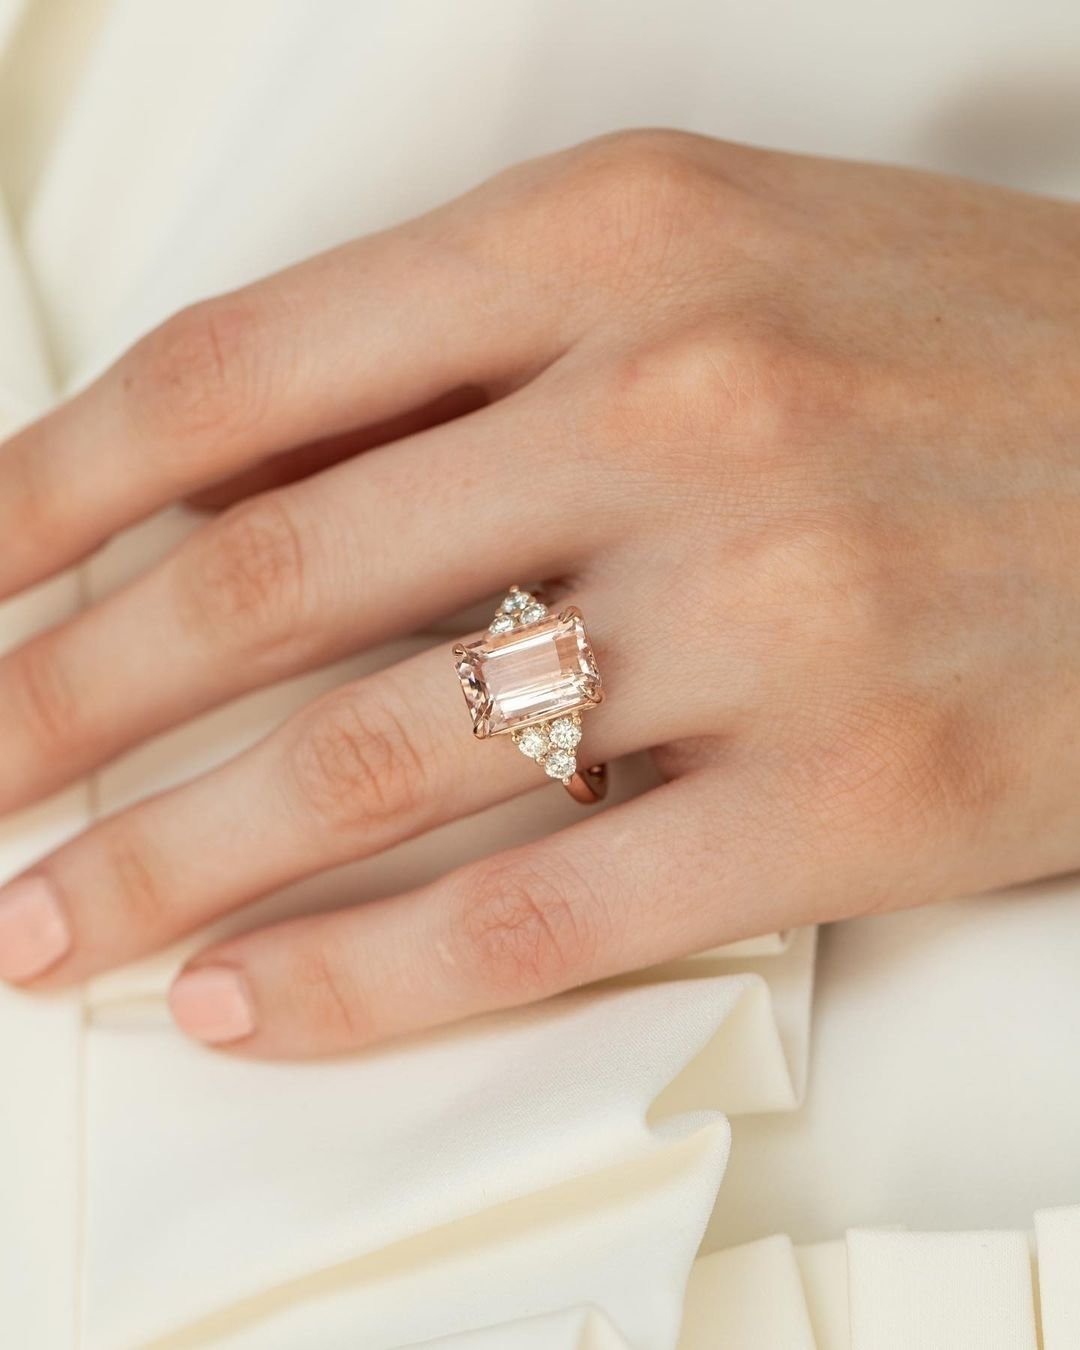 morganite engagement rings with amazing details3